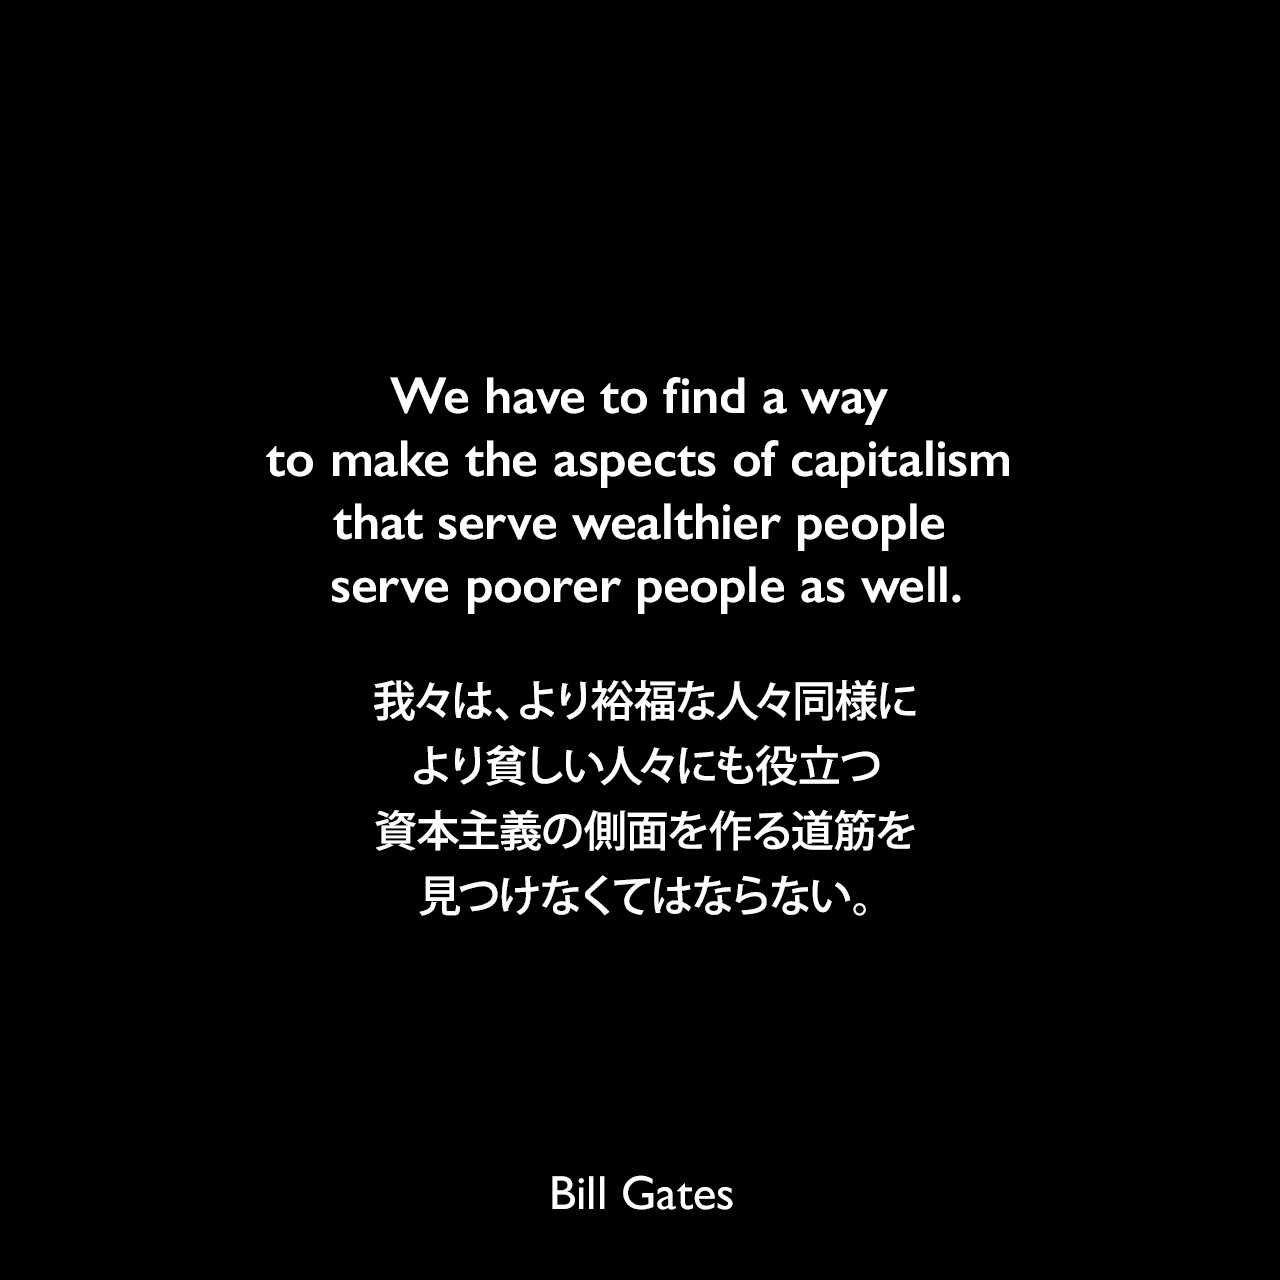 We have to find a way to make the aspects of capitalism that serve wealthier people serve poorer people as well.我々は、より裕福な人々同様に、より貧しい人々にも役立つ資本主義の側面を作る道筋を見つけなくてはならない。Bill Gates